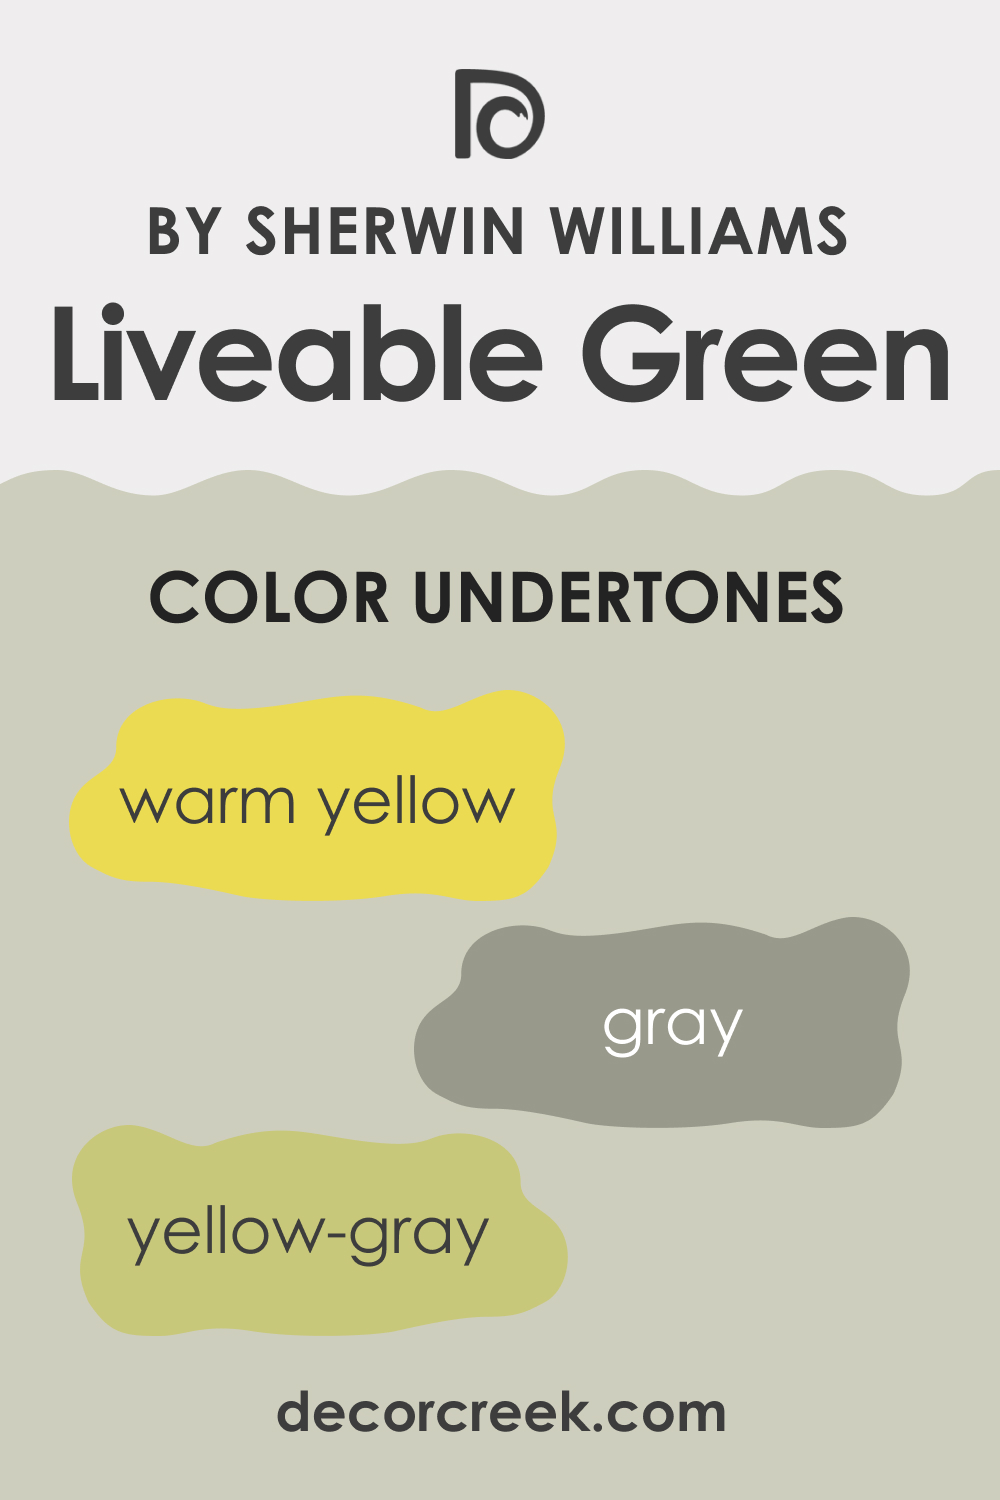 What Undertones Does Liveable Green SW 6176 Have?